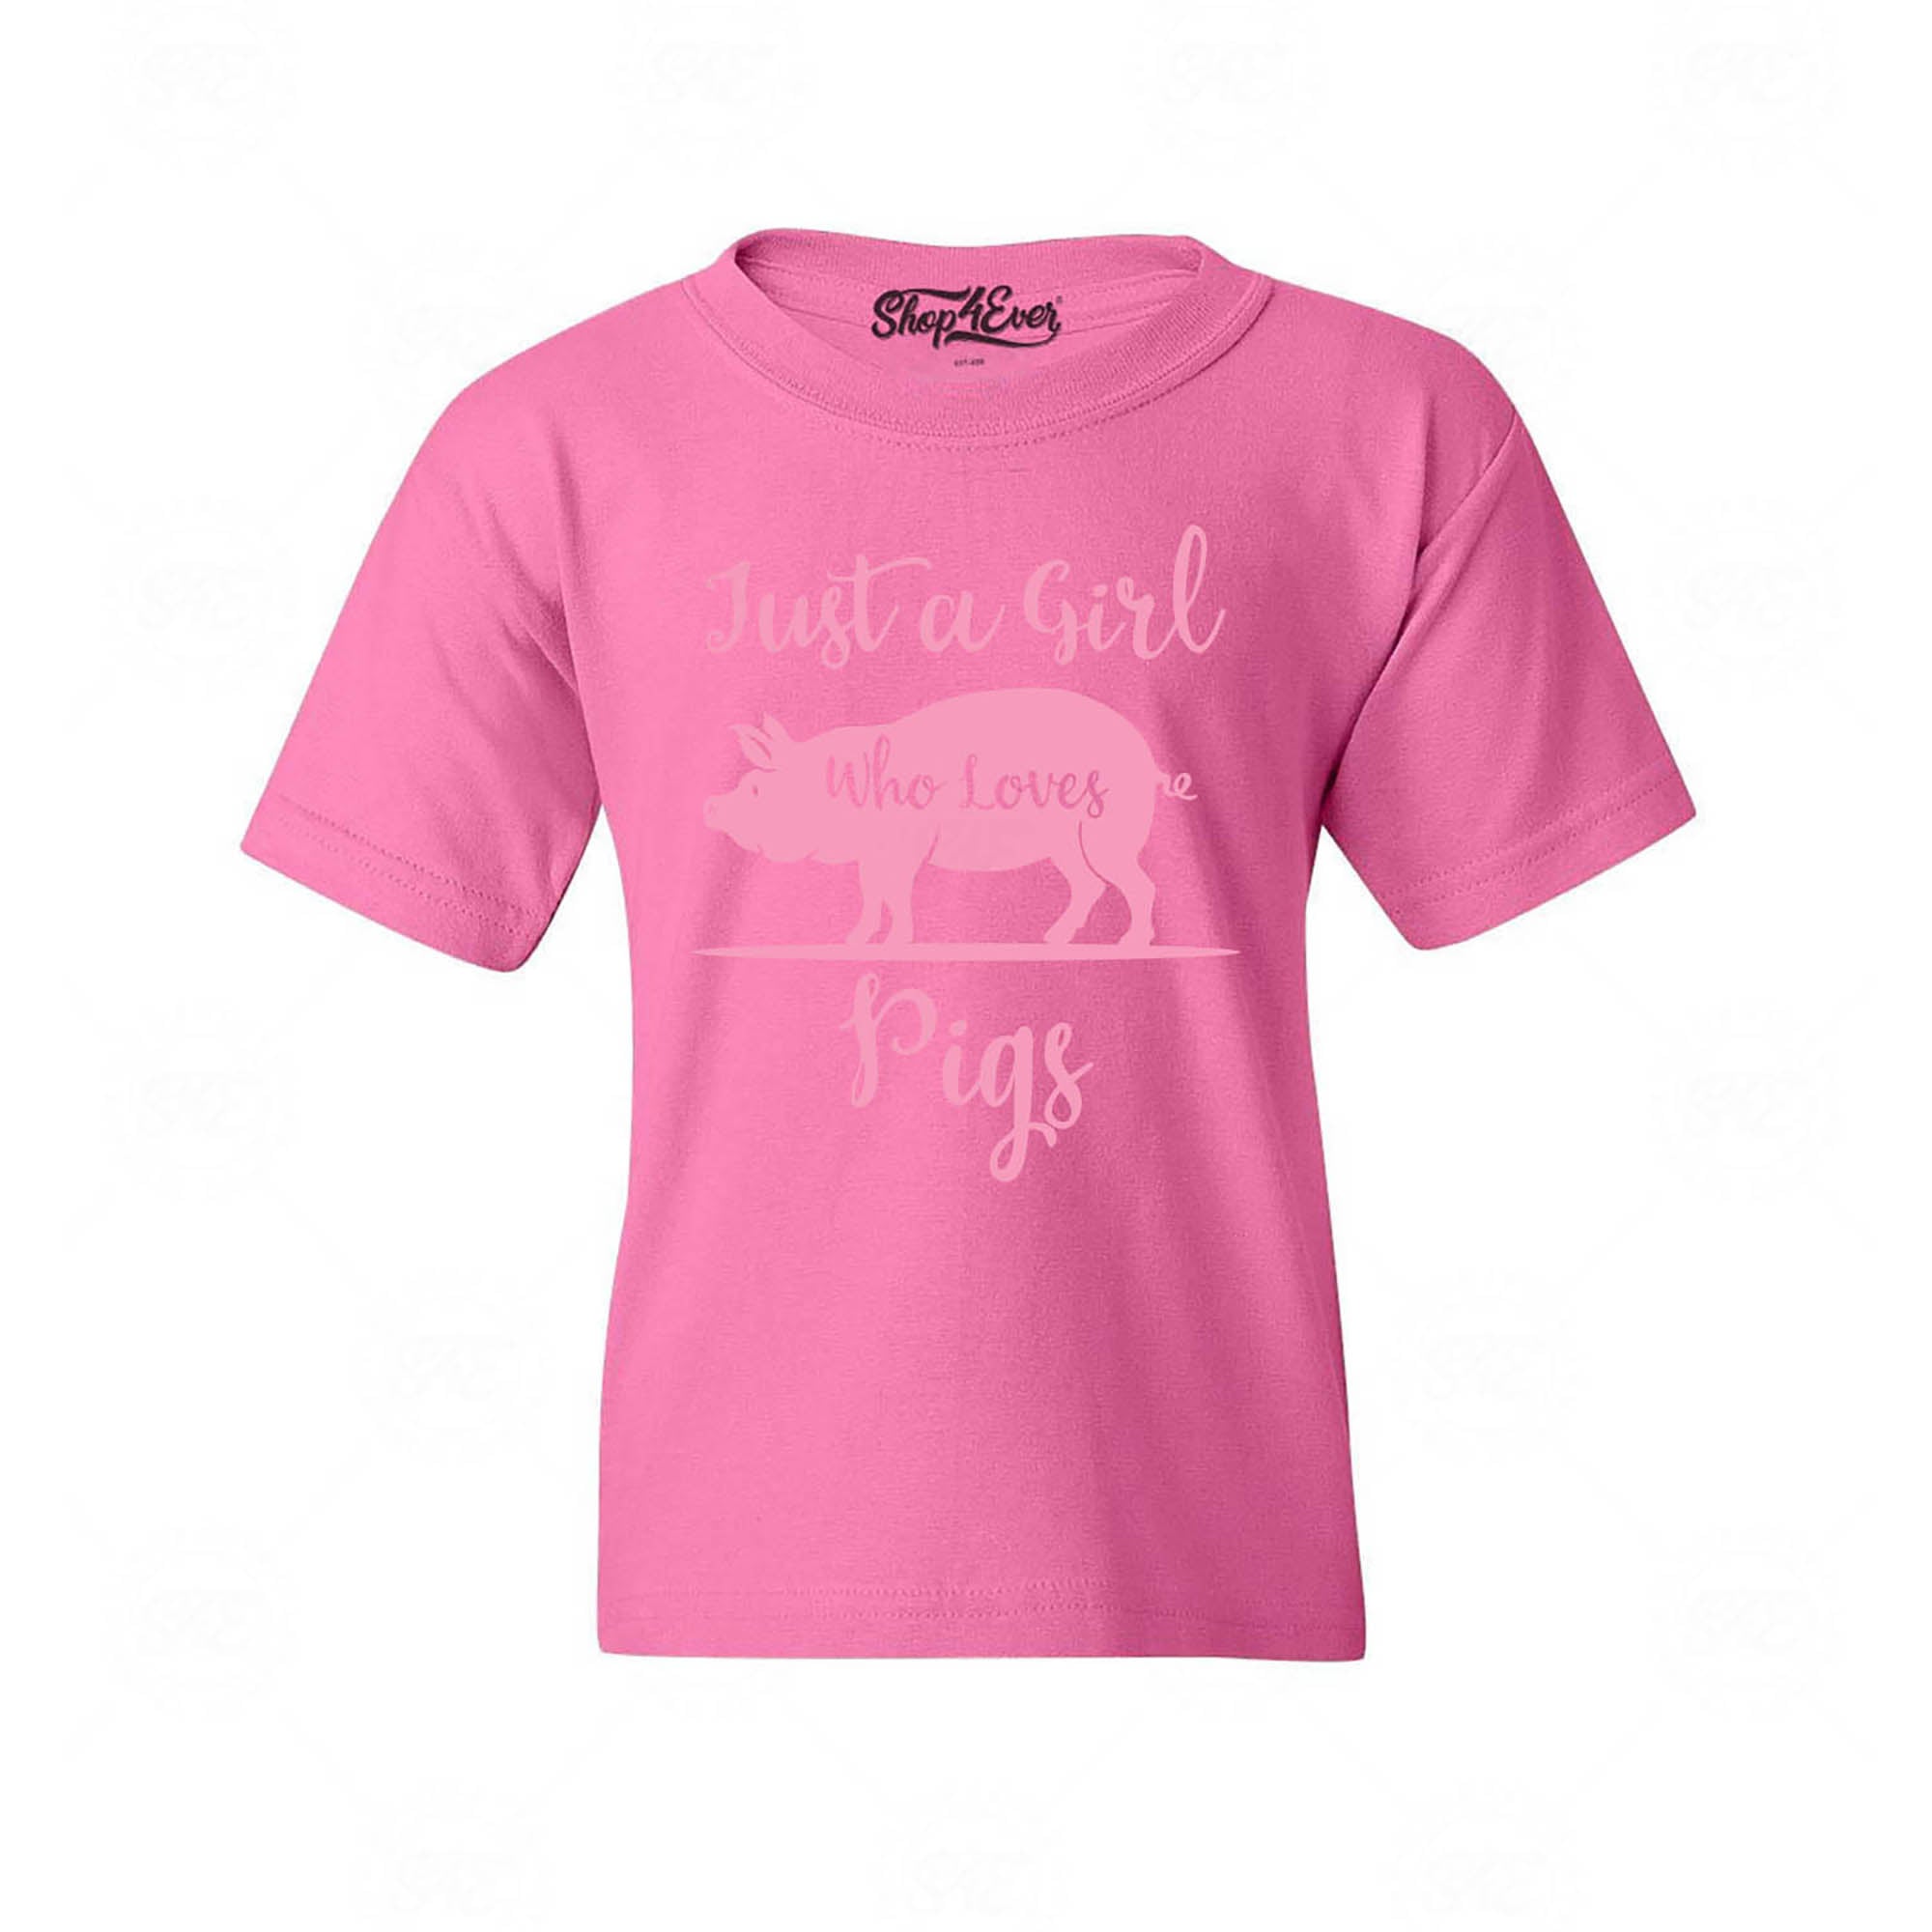 Just A Girl Who Loves Pigs Youth's T-Shirt